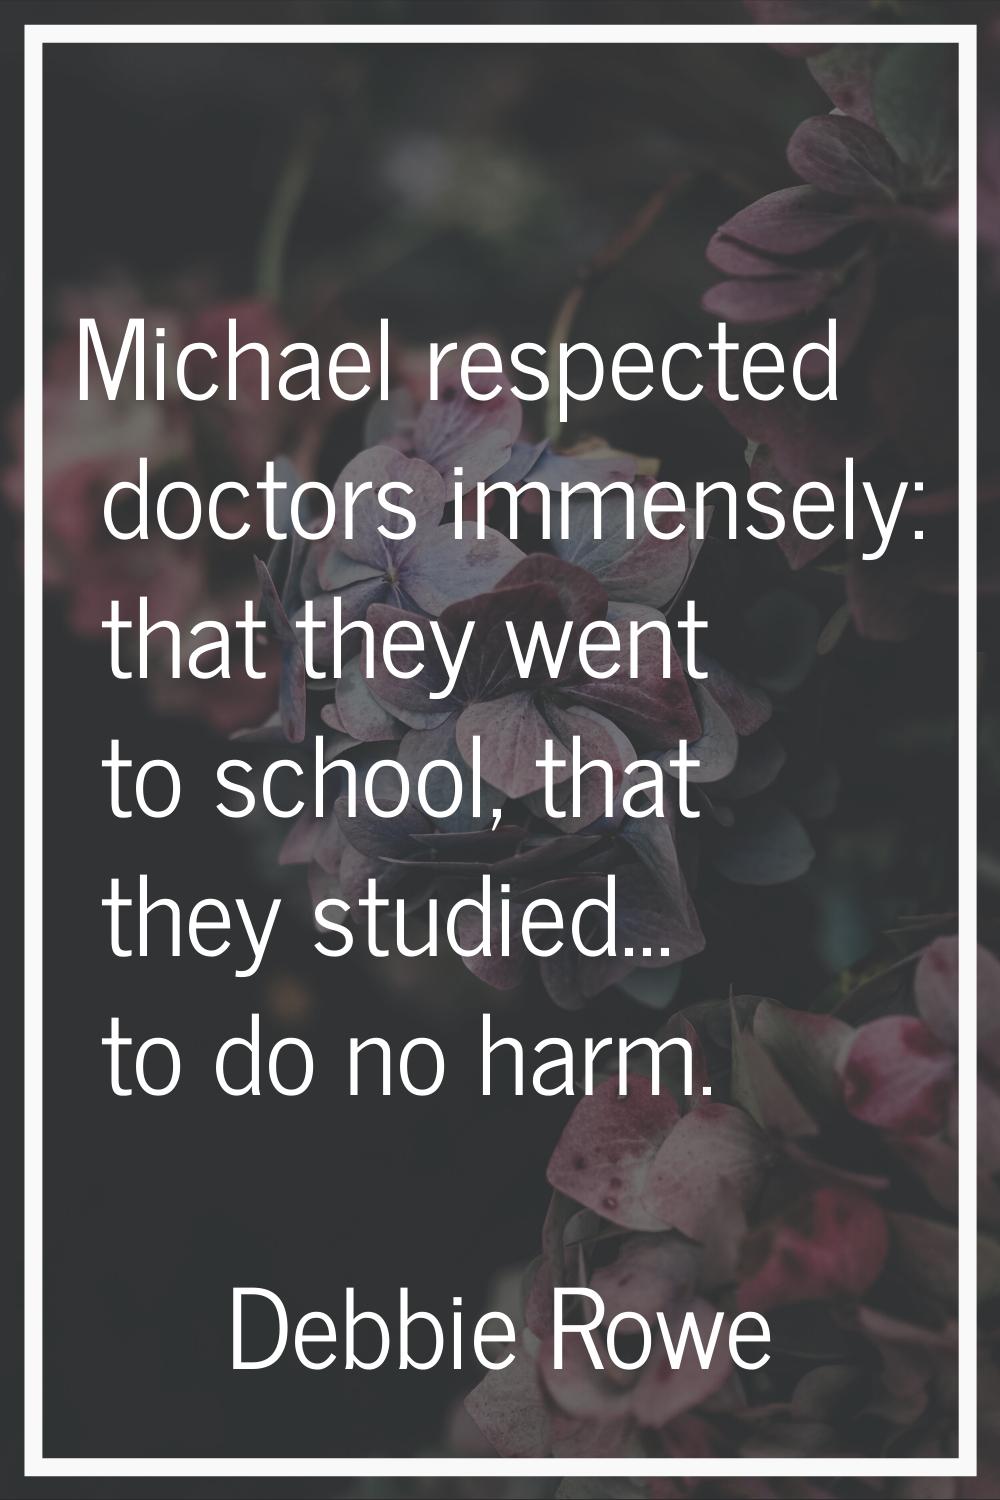 Michael respected doctors immensely: that they went to school, that they studied... to do no harm.